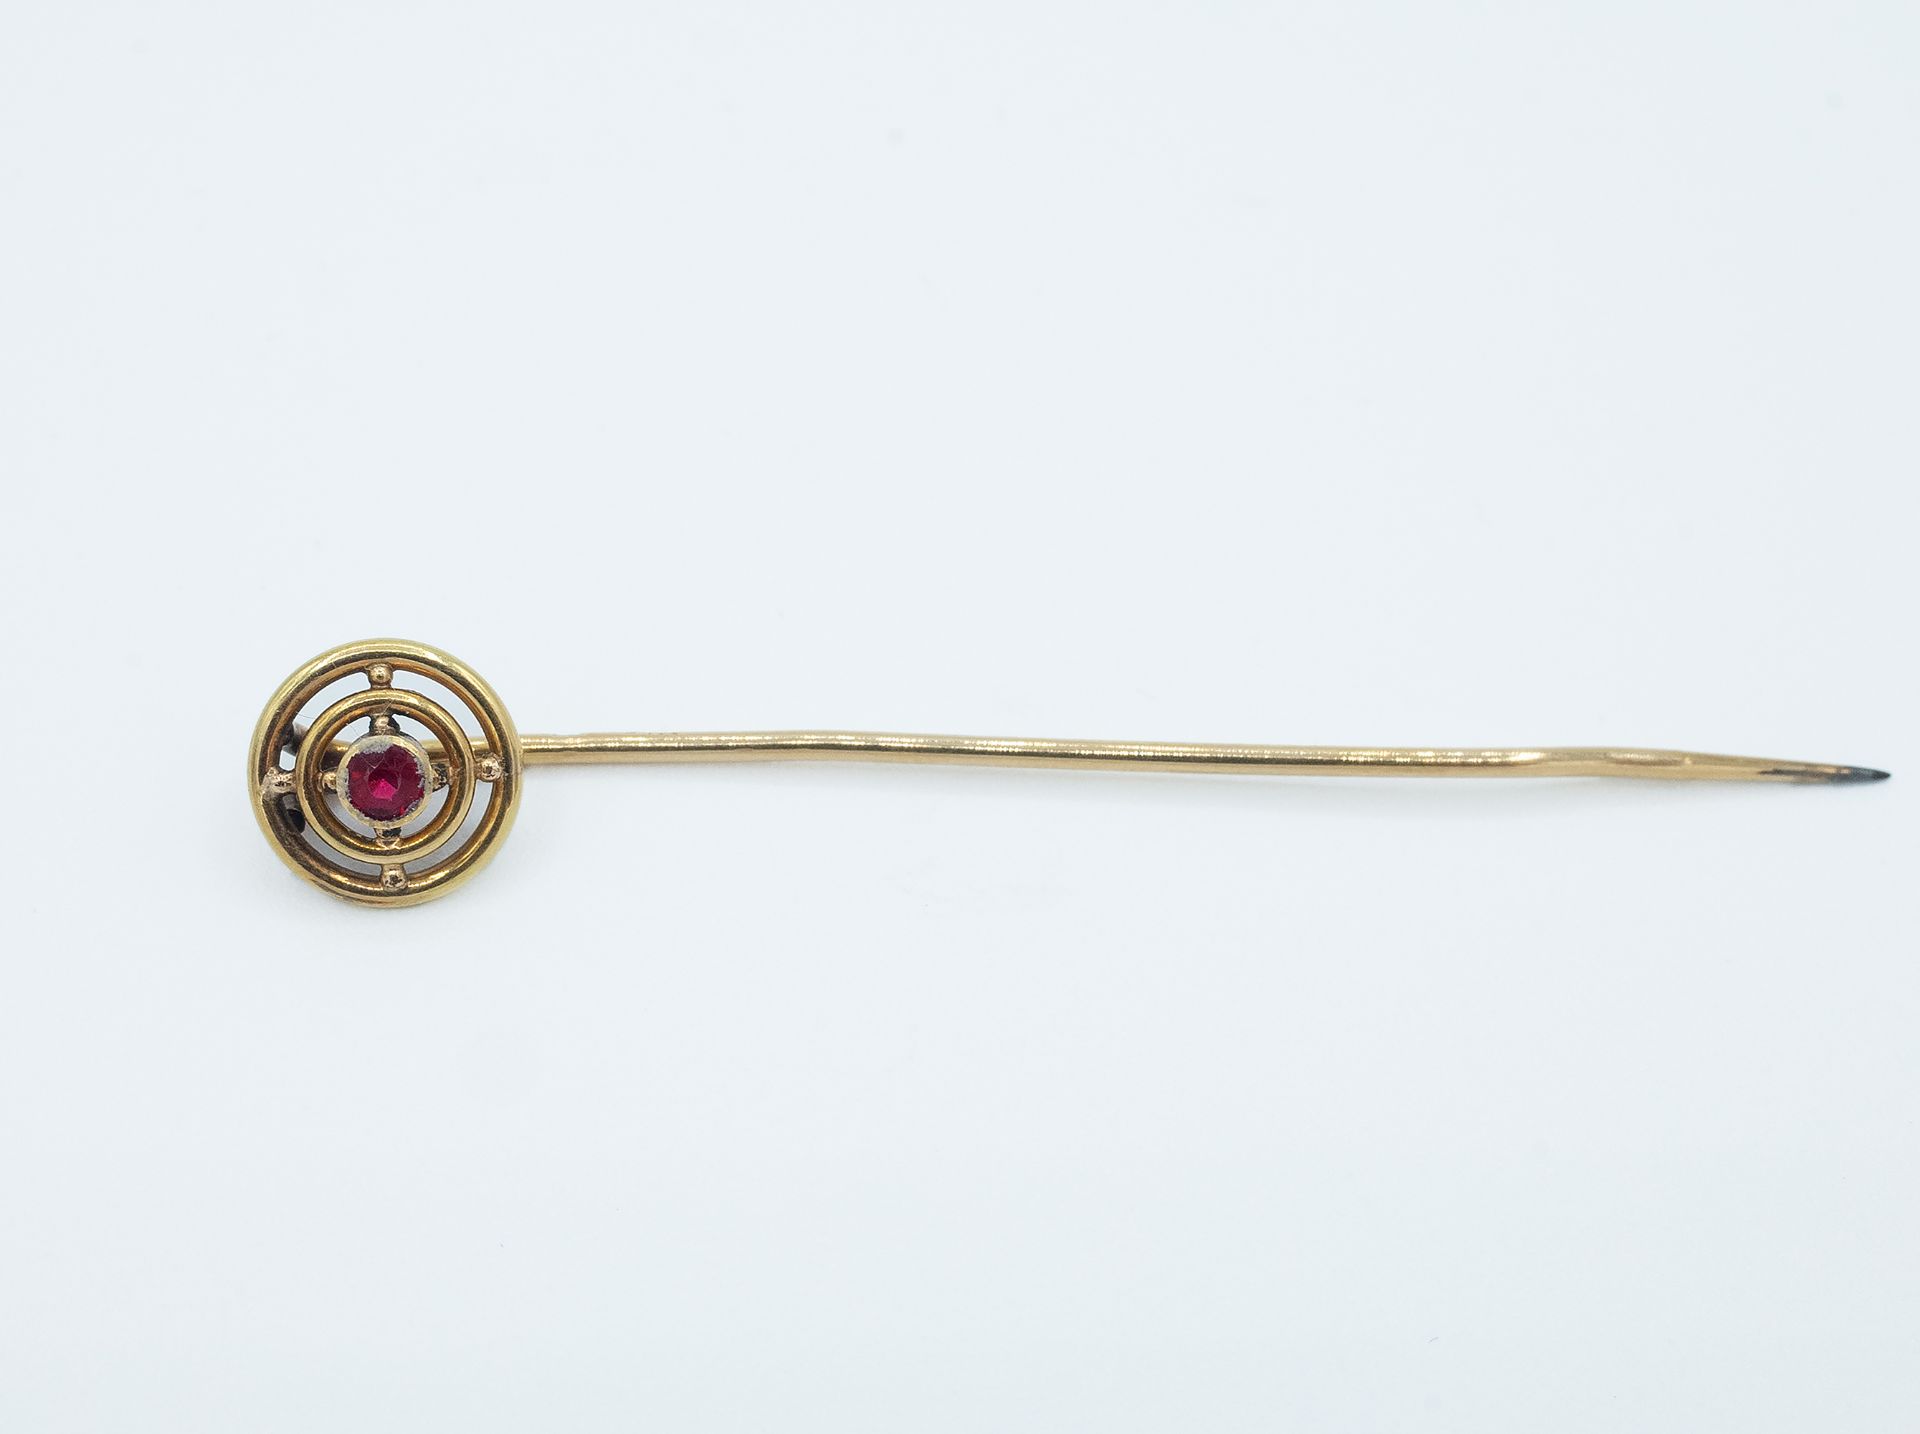 A mid 20th century gold and garnet tie pin